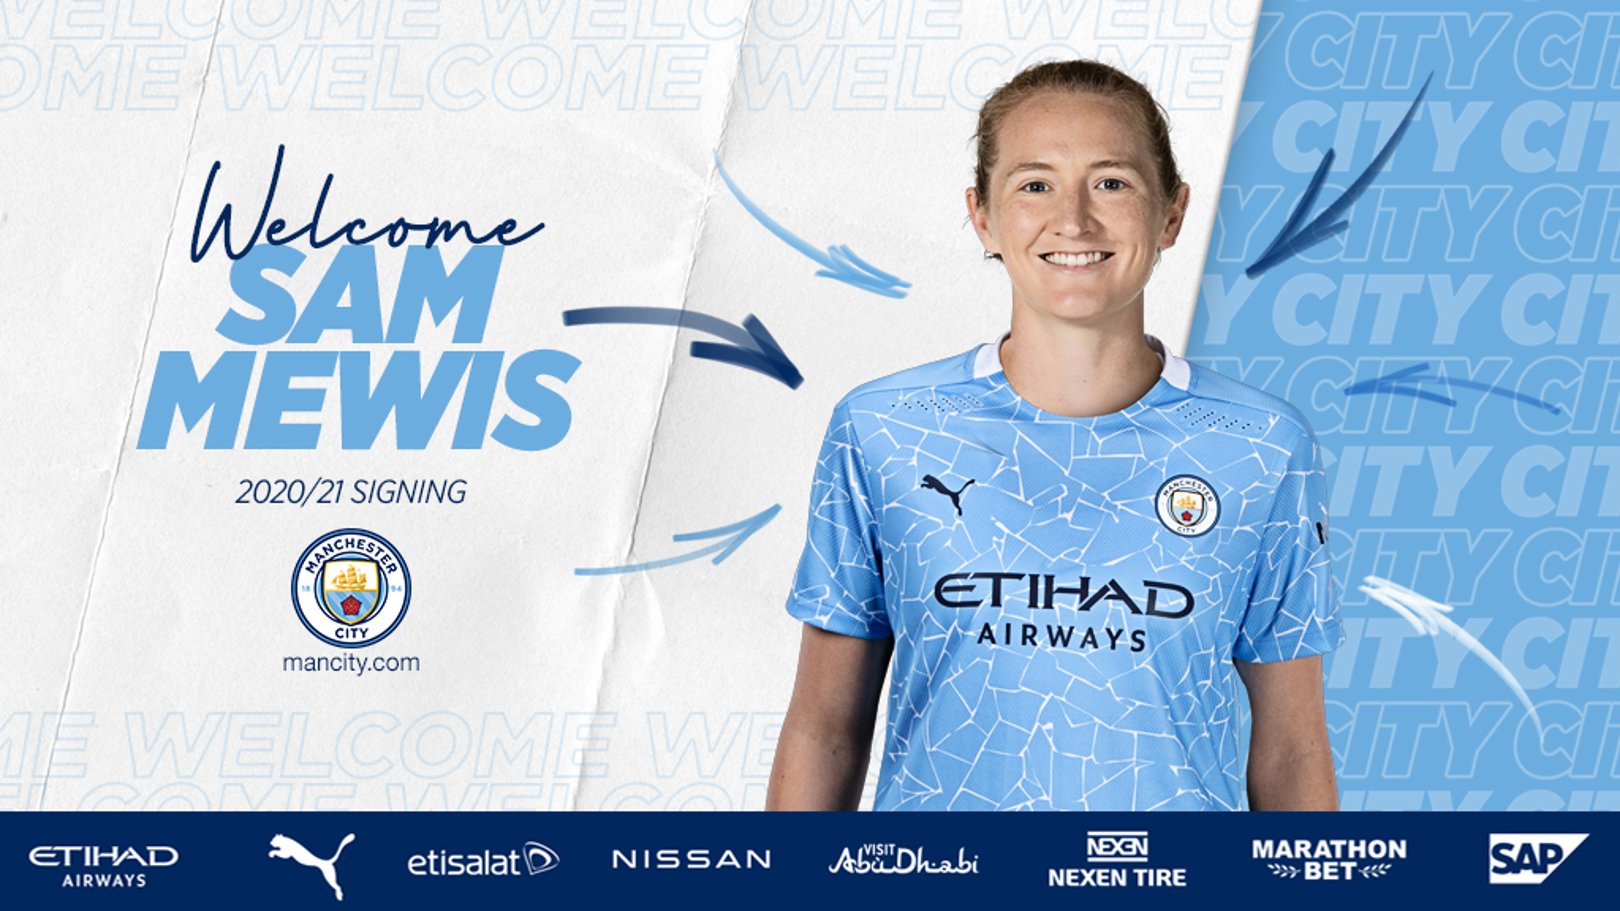 Sam Mewis signs for City